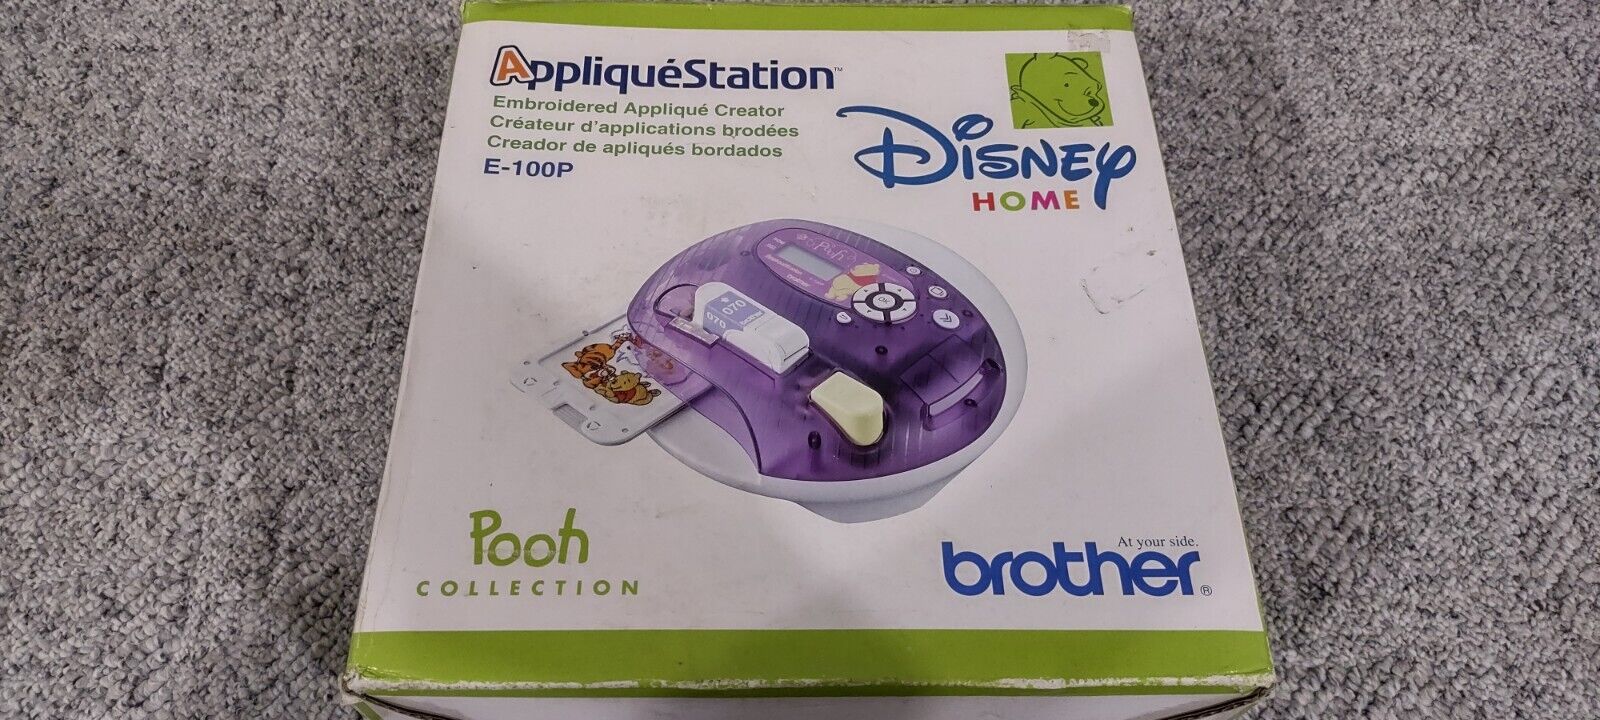 Disney Home Applique Station Brother E-100p Winnie The Pooh Embroidery